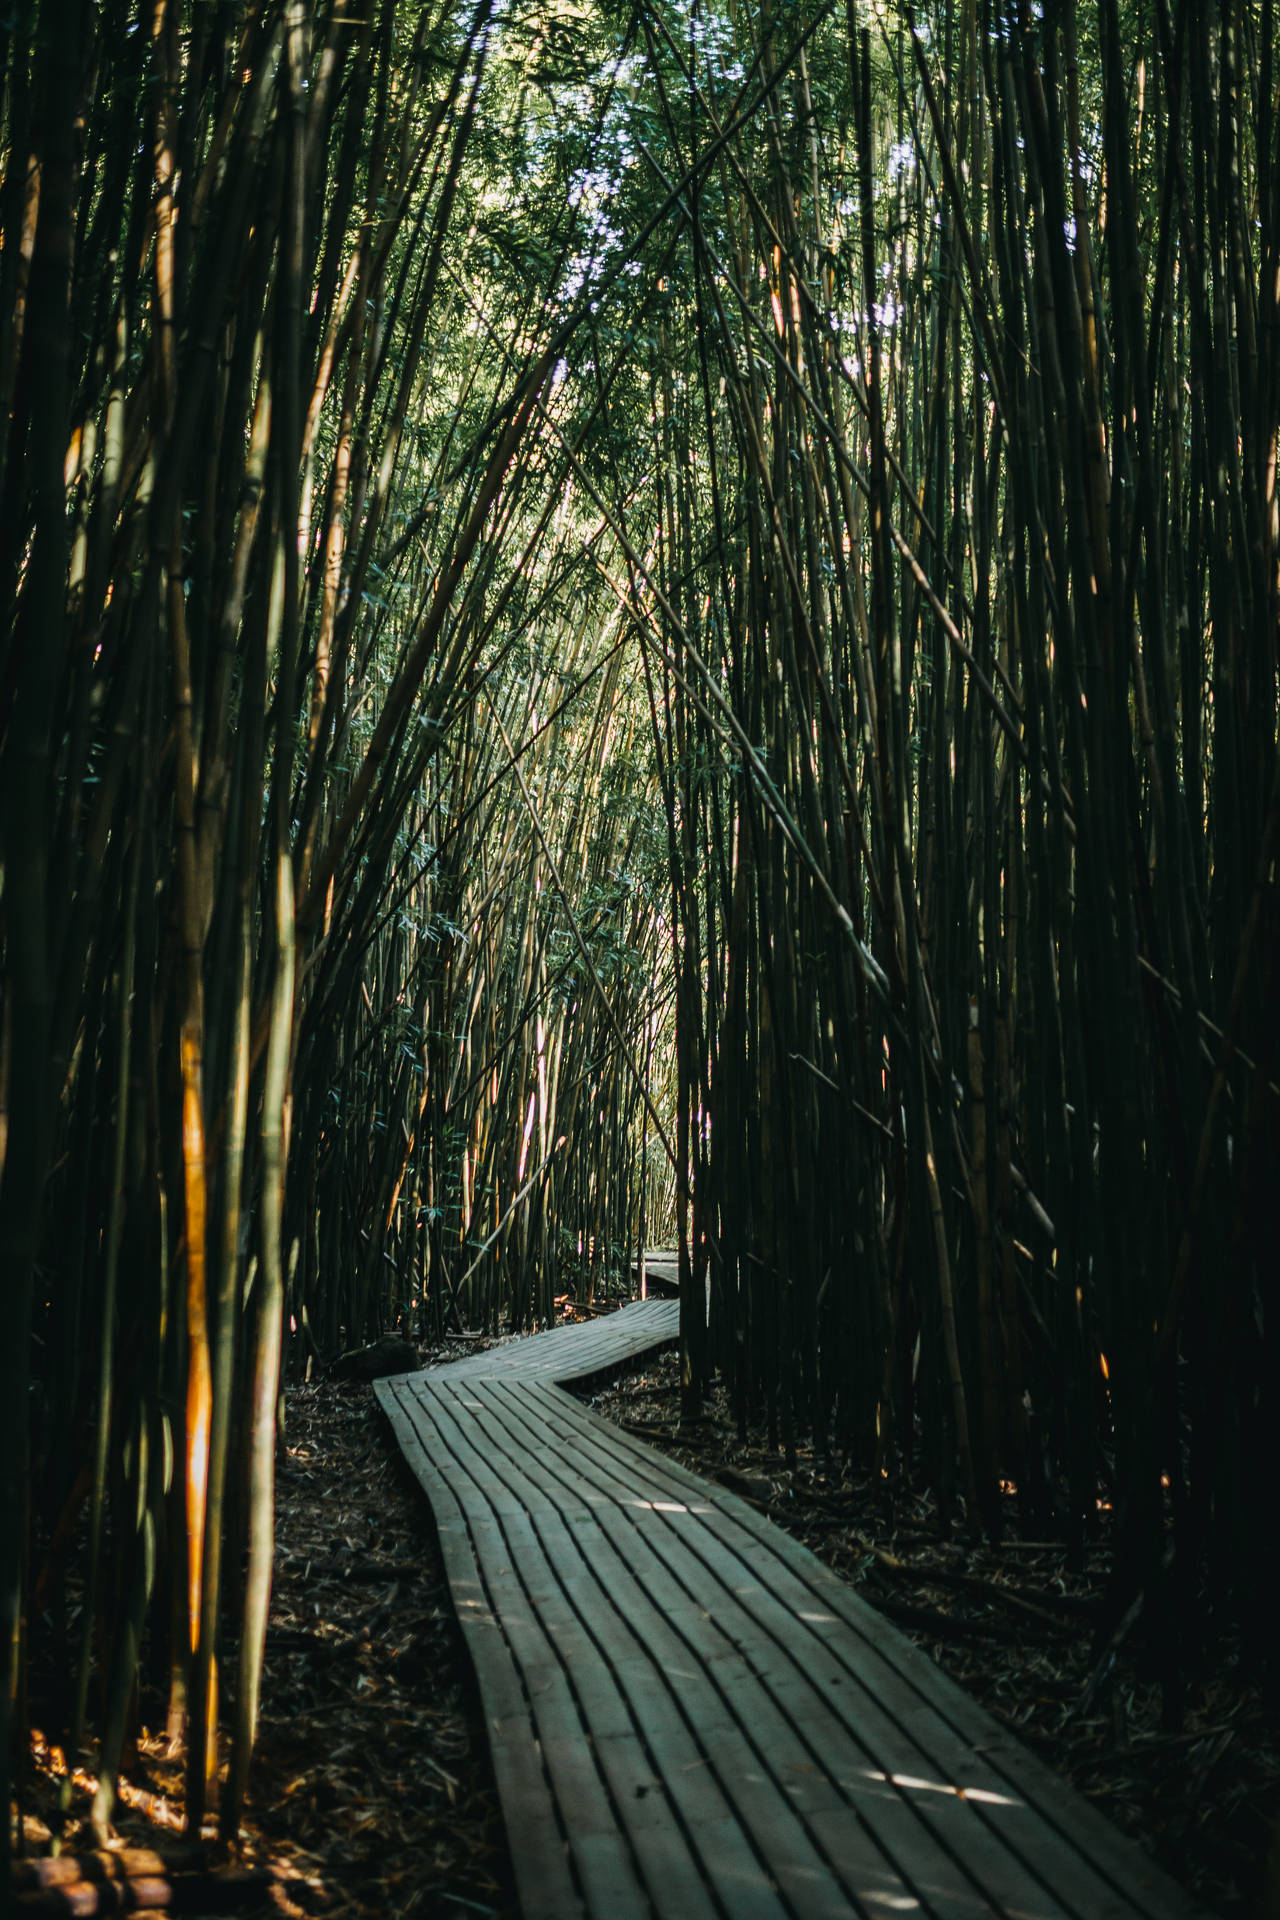 Pathway With Bamboos